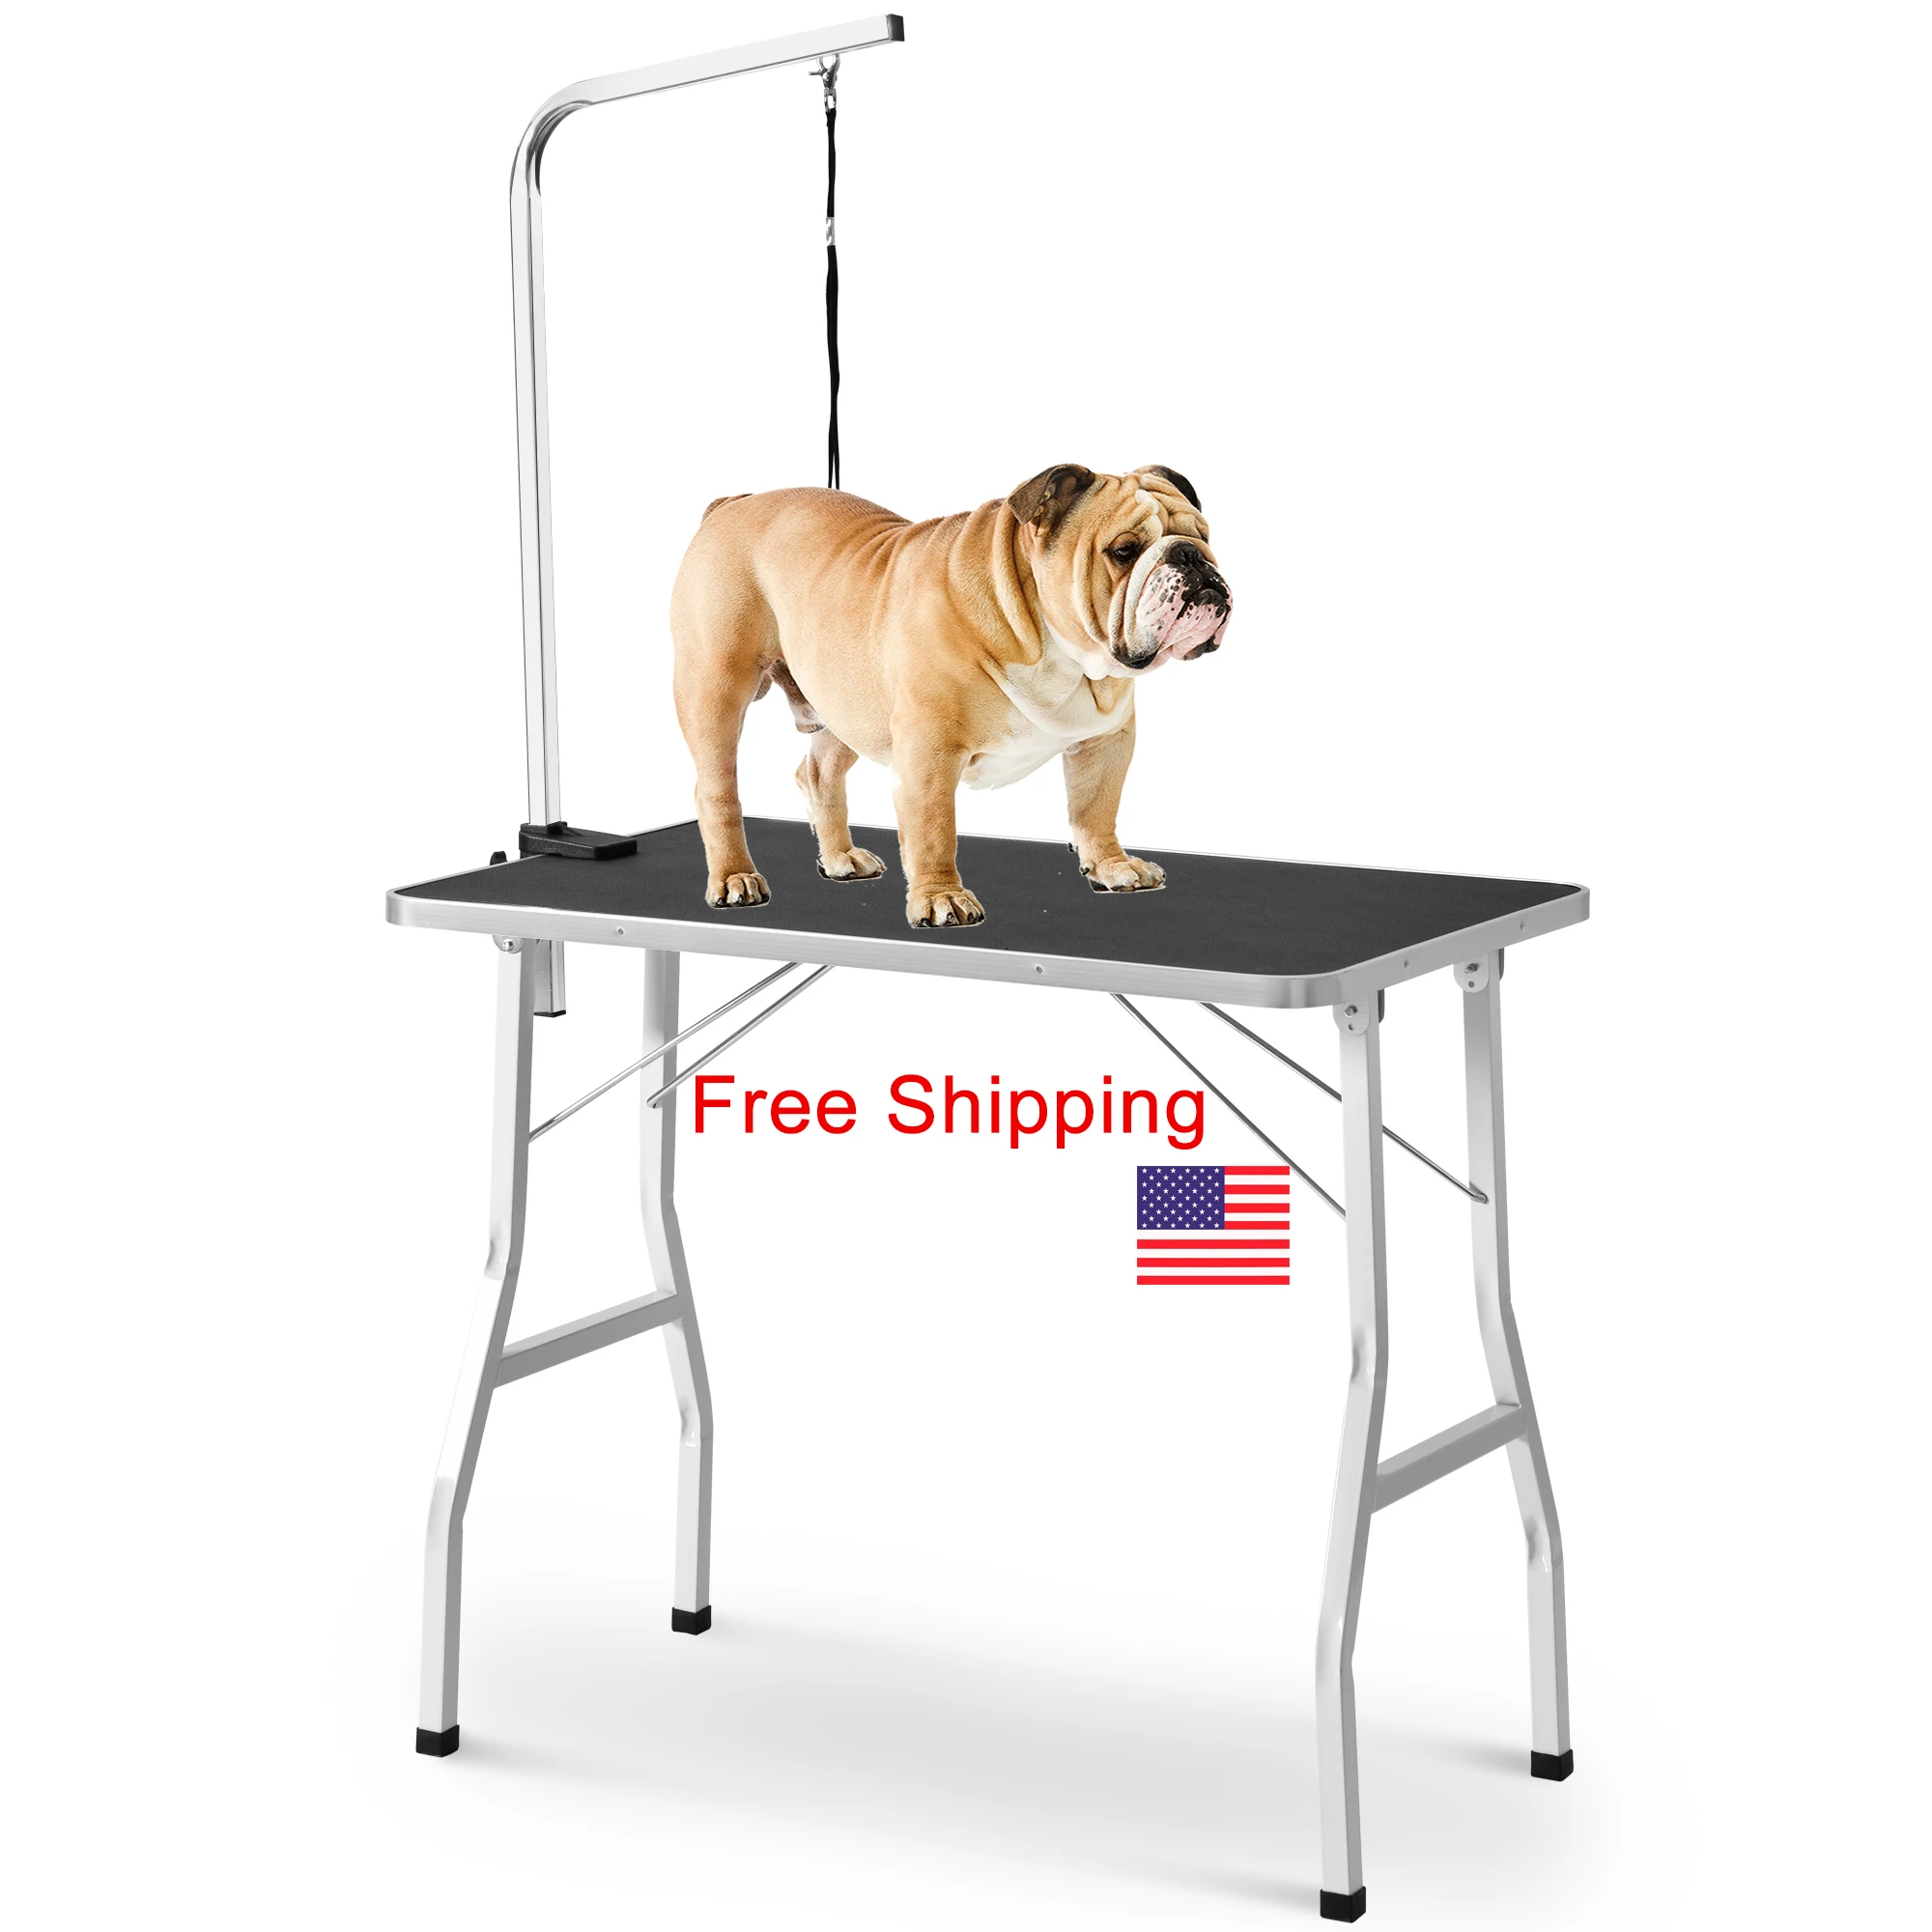 

Free shipping US small size 30" steel legs foldable nylon clamp adjustable arm rubber mat pet grooming table, Picture